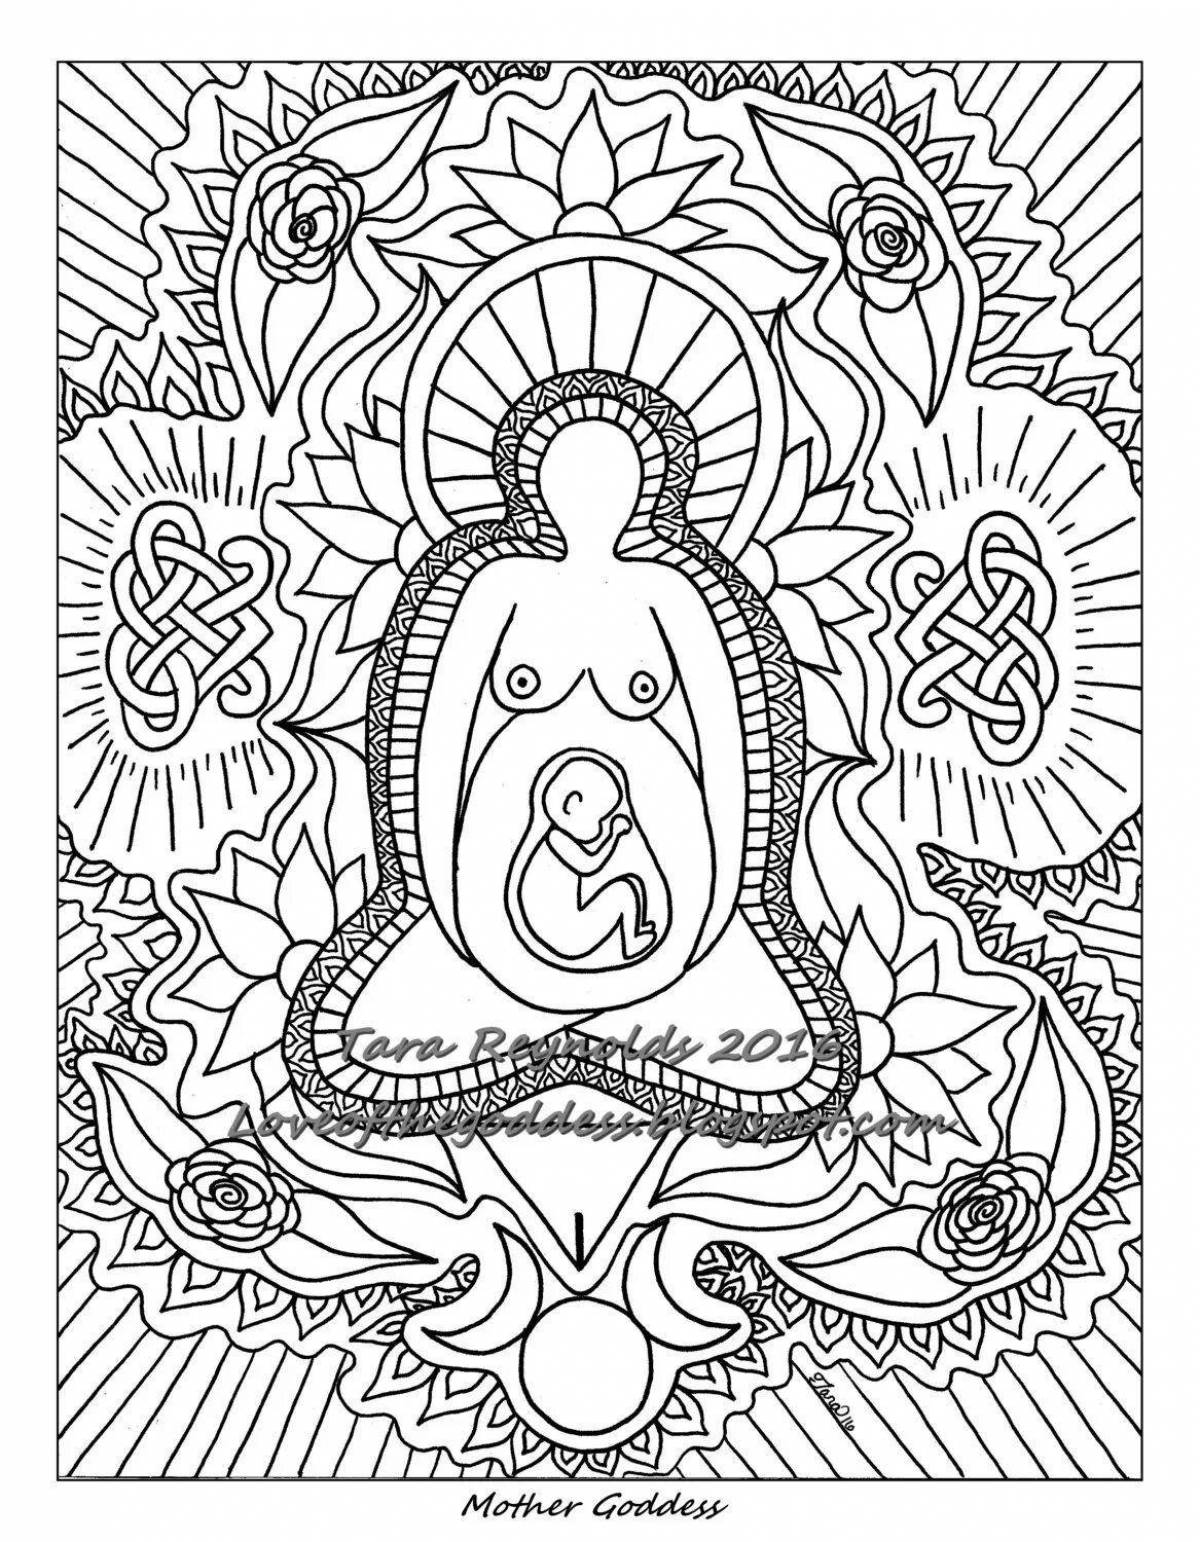 Exciting meditation coloring book